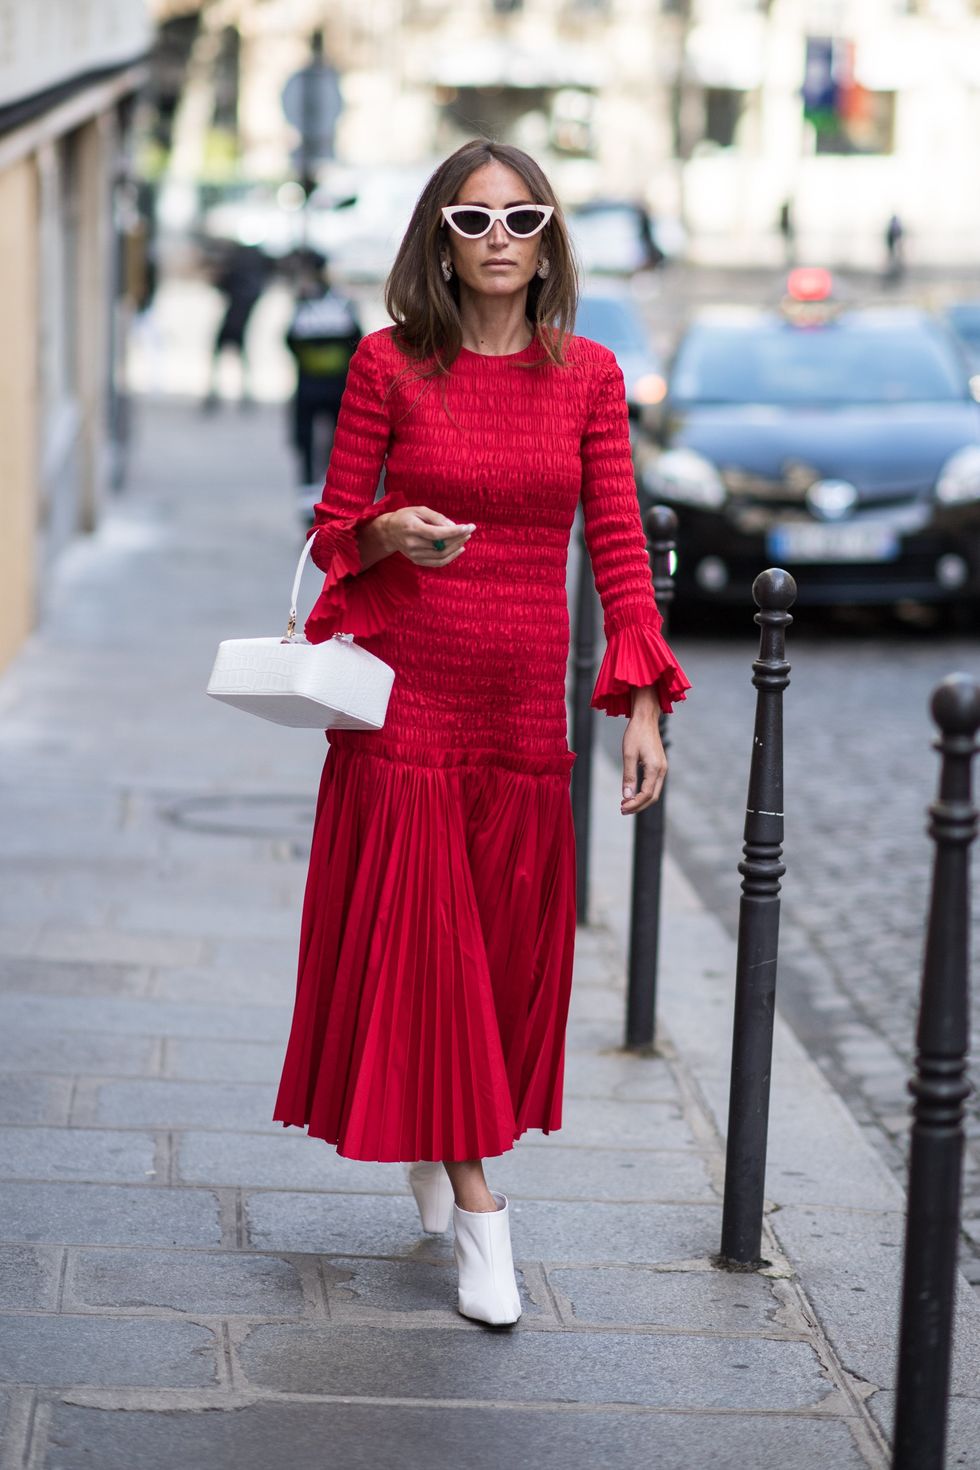 These 2019 Fashion Trends Are Already in Your Closet - Brit + Co